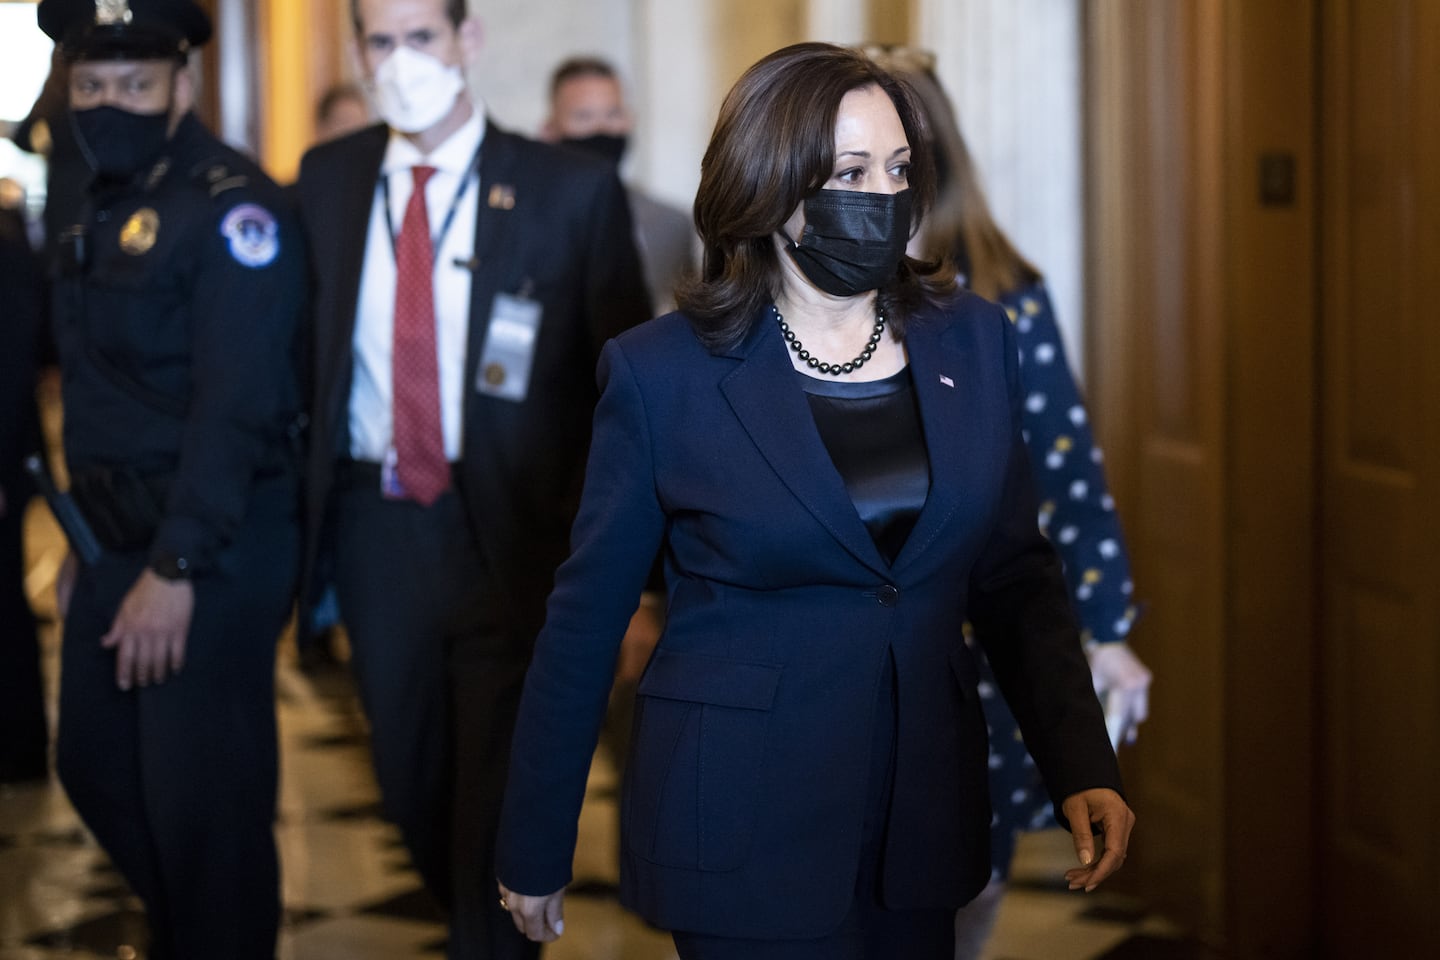 U.S. Vice President Kamala Harris wears a protective mask while walking through the U.S. Capitol in Washington, D.C., U.S. on Thursday, March 4, 2021. Senators enter the final stages of debating Democrats' $1.9 trillion pandemic relief bill today with passage in the chamber likely over the weekend and a security threat looming over the Capitol that prompted the House to wrap up work for the week ahead of schedule. Photographer: Ting Shen/Bloomberg via Getty Images